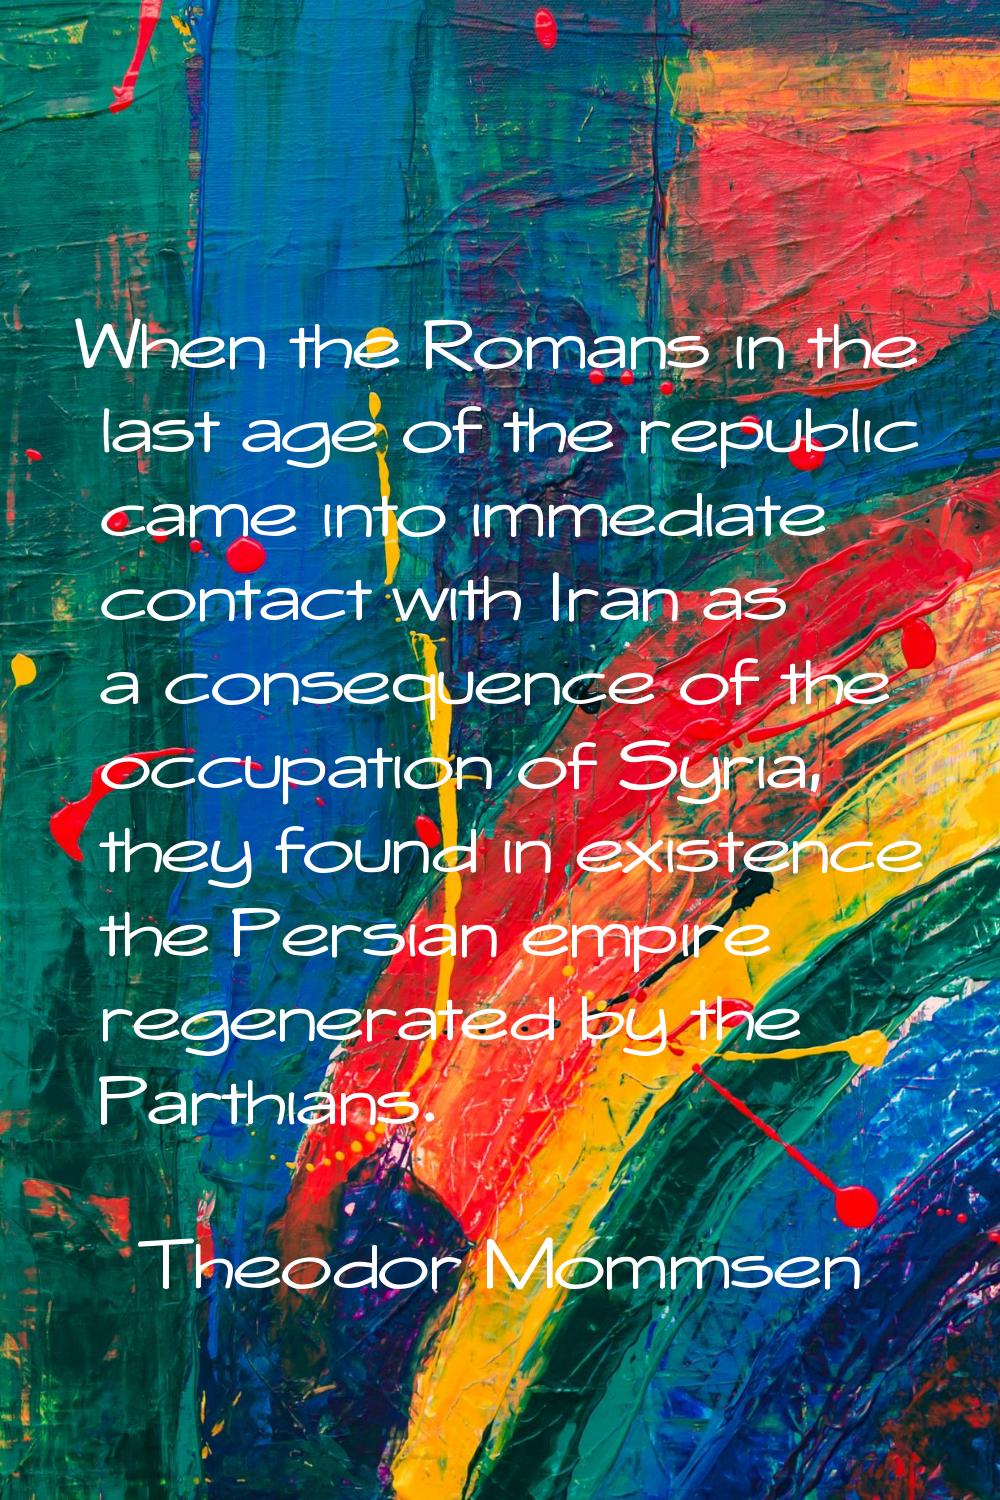 When the Romans in the last age of the republic came into immediate contact with Iran as a conseque